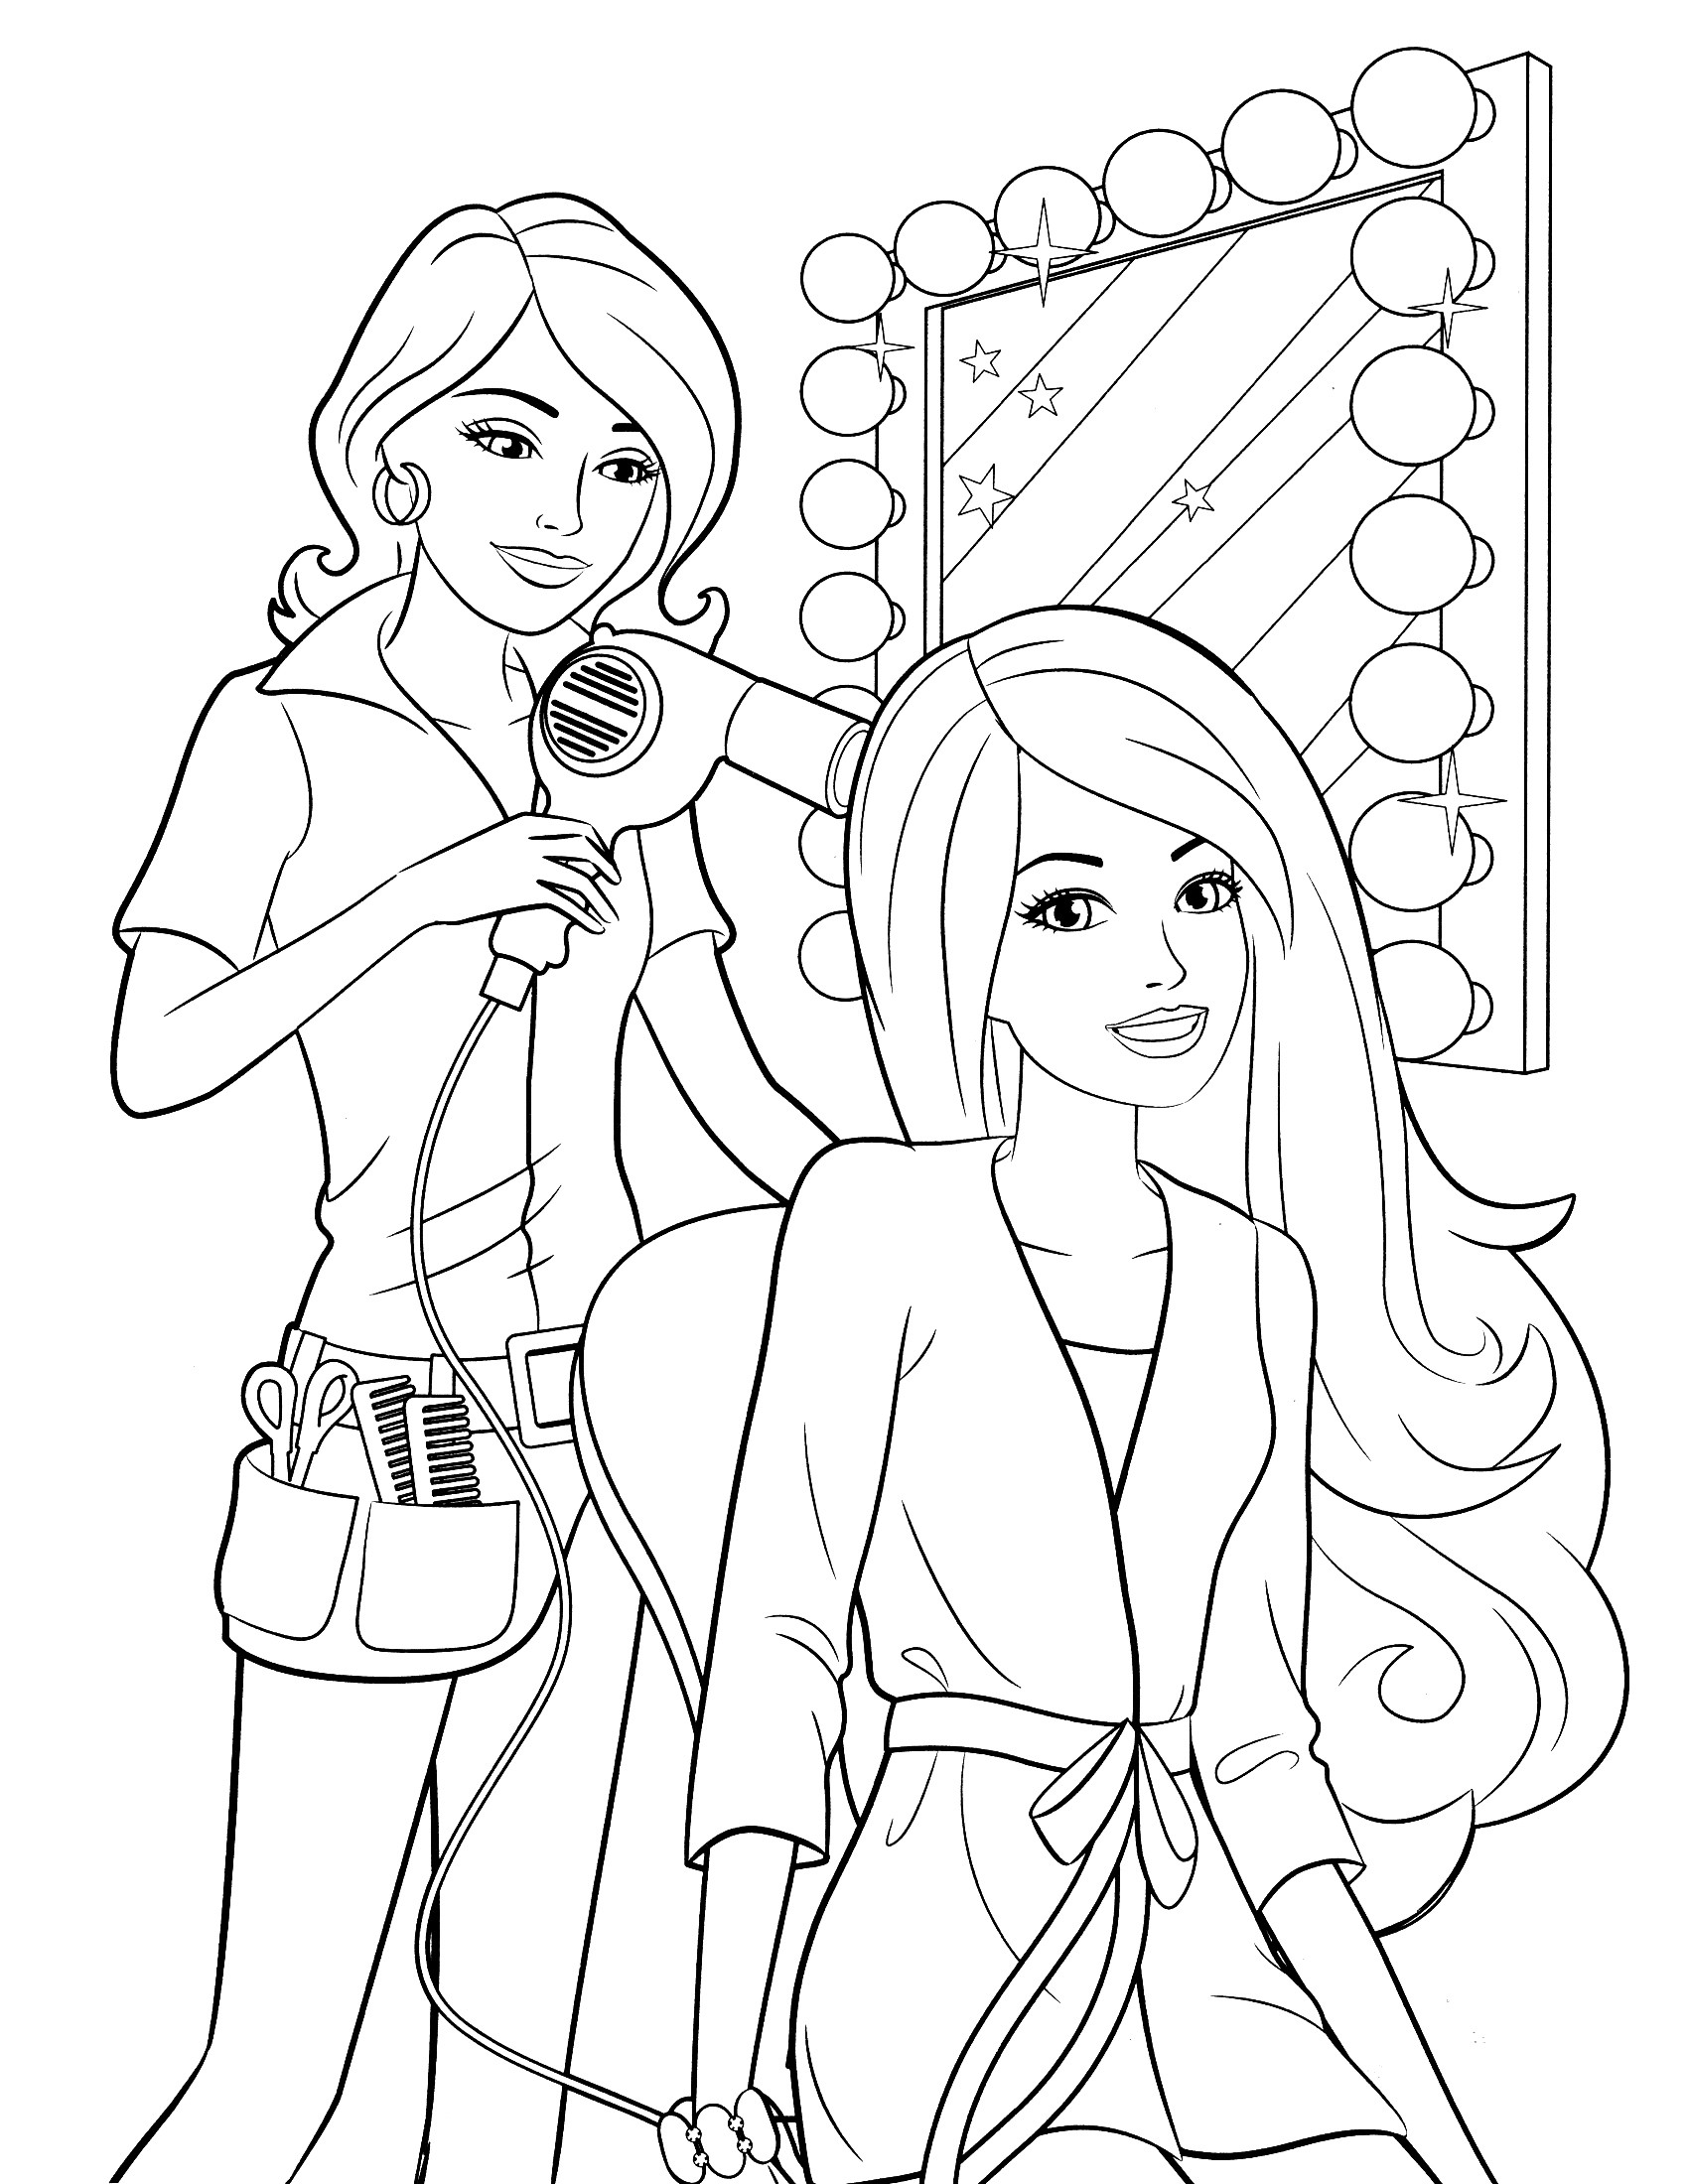 Coloring Pages For Girl Kids
 Coloring Pages for Girls Best Coloring Pages For Kids